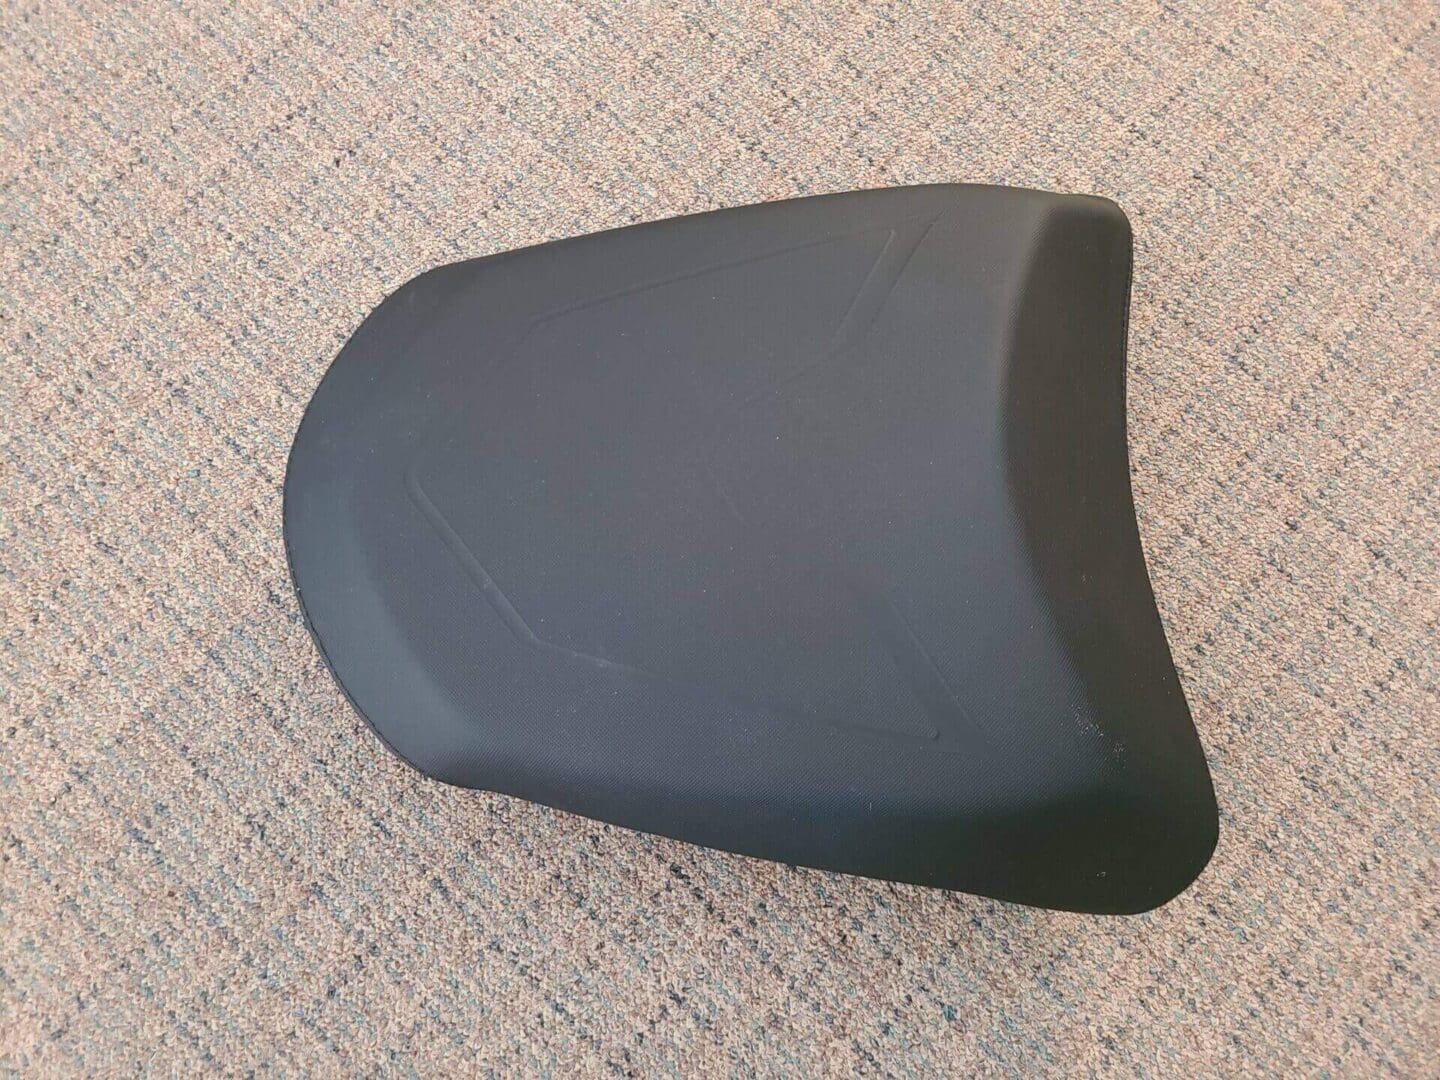 A small black color seat kept on the ground